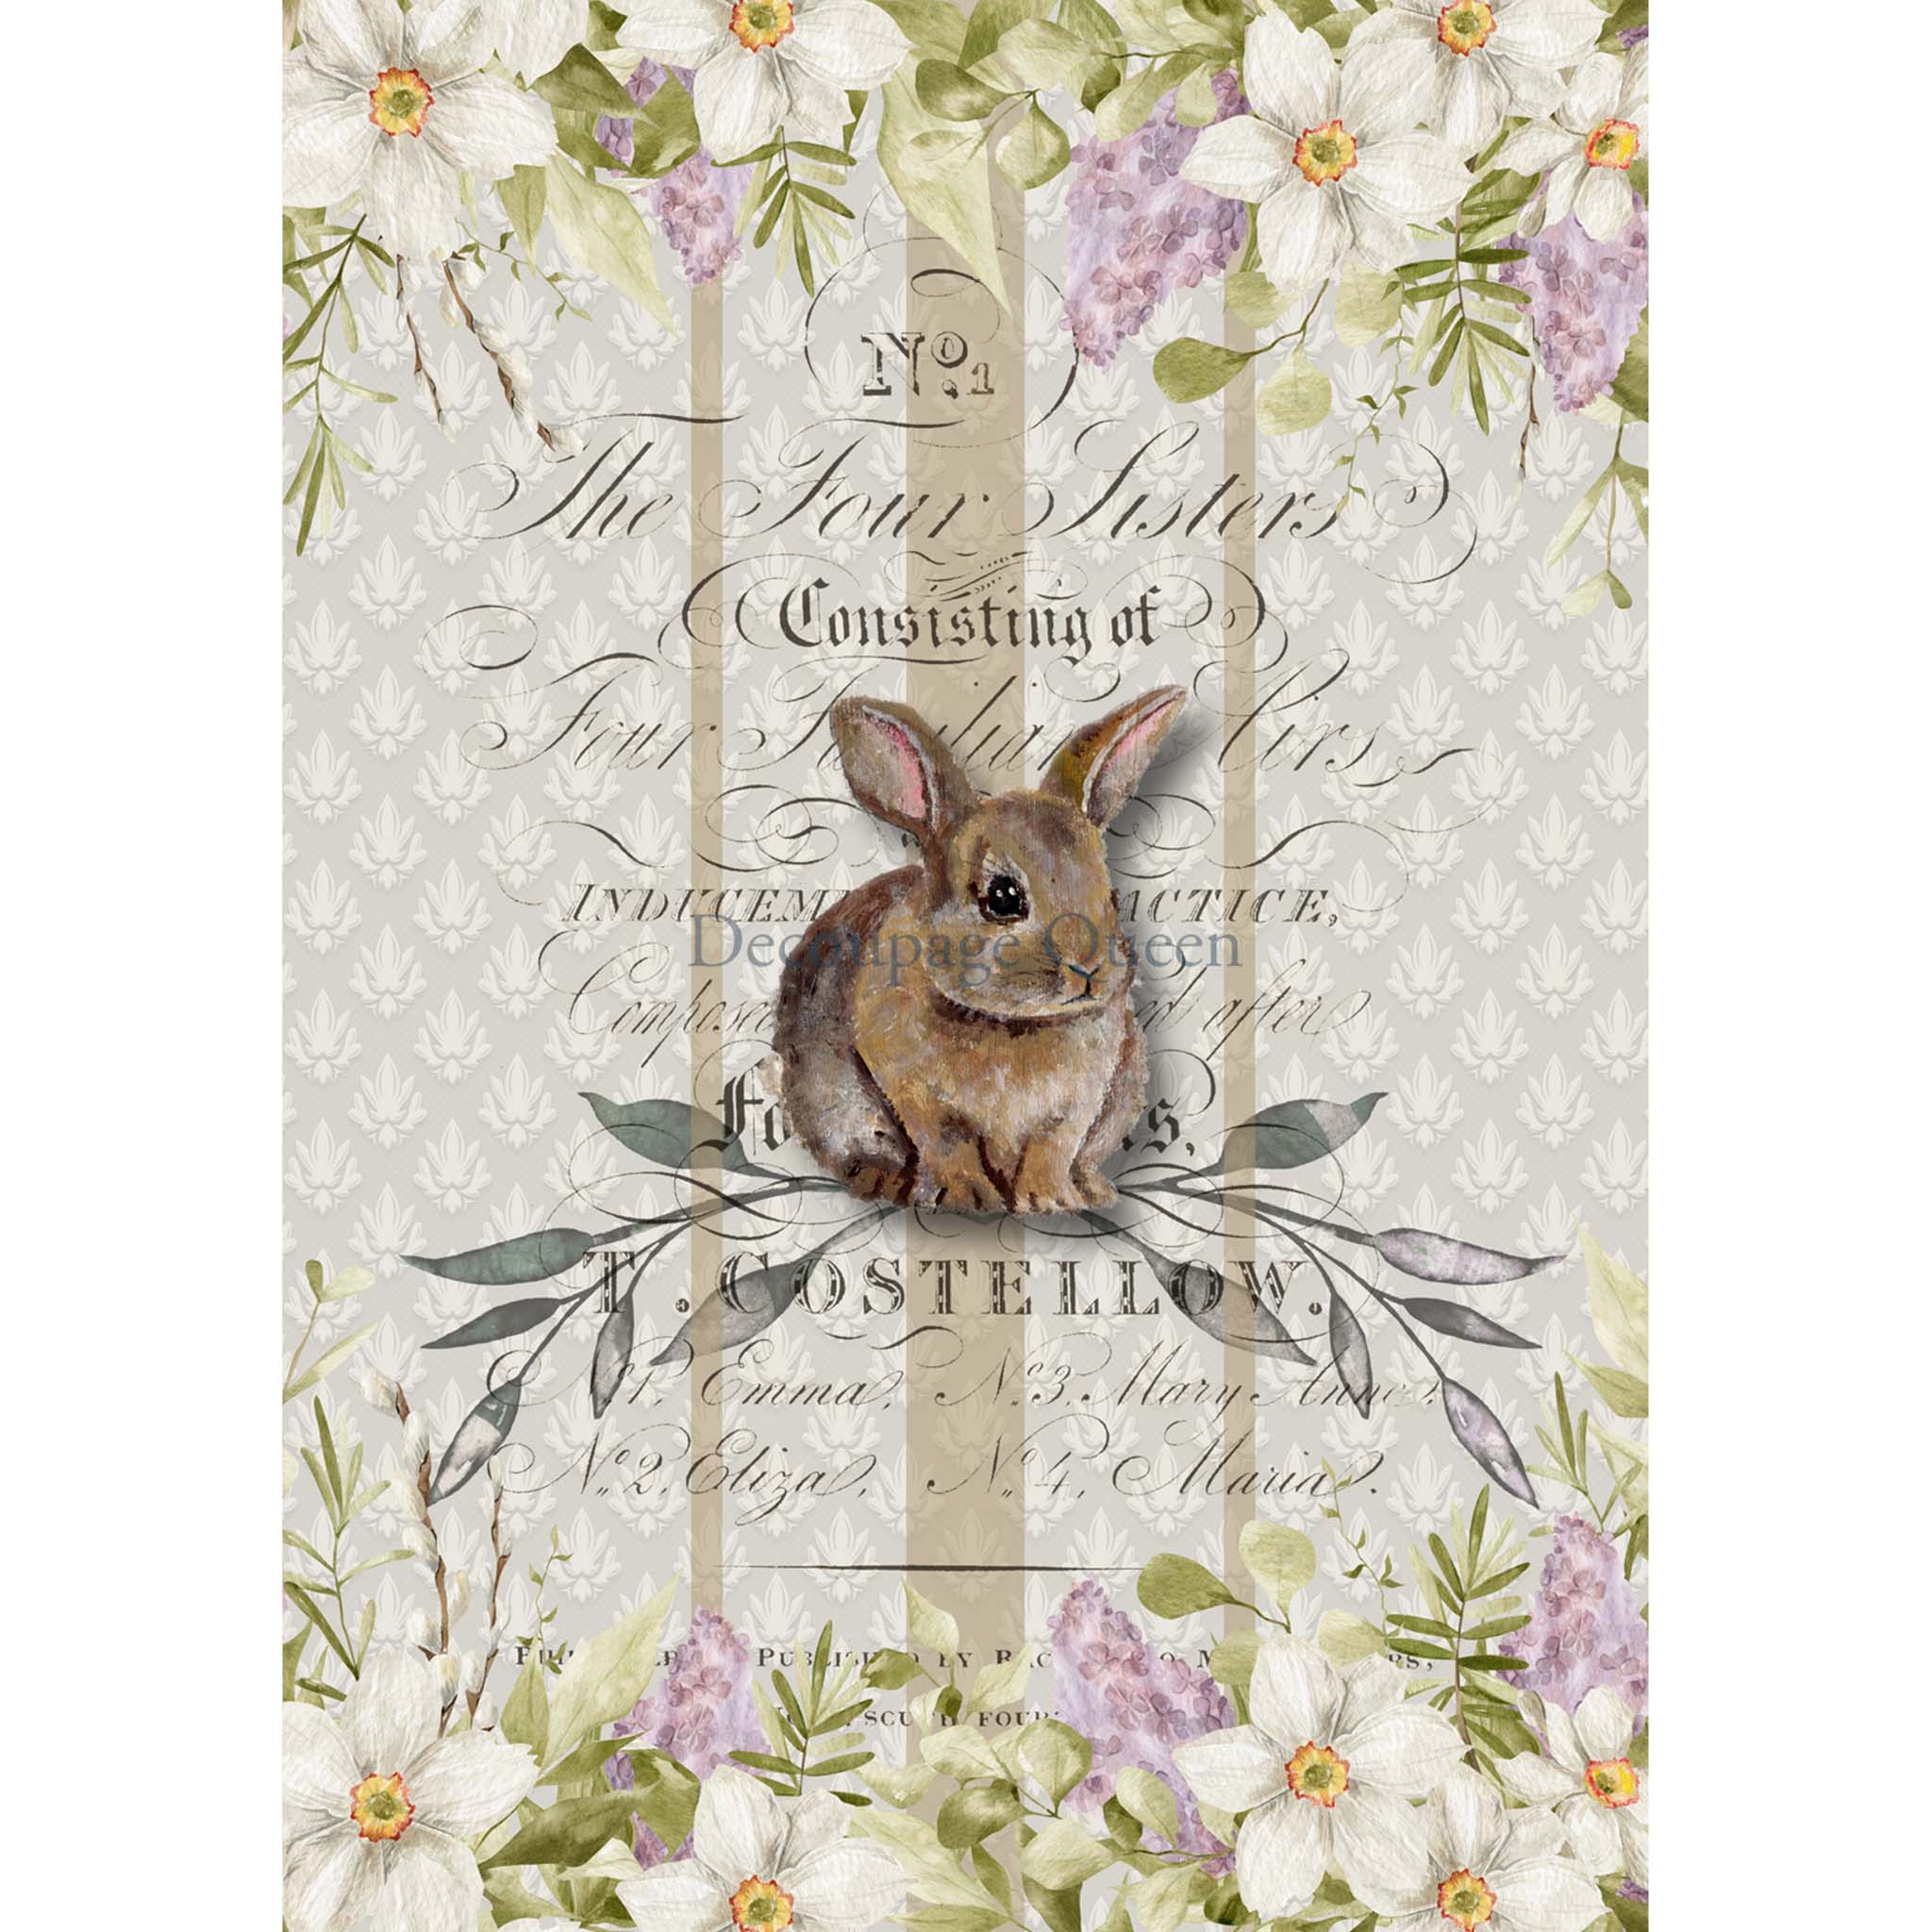 A4 rice paper design that features a charming bunny surrounded by beautiful flowers and elegant script with a repeating flourish pattern in the background. White borders are on the sides.